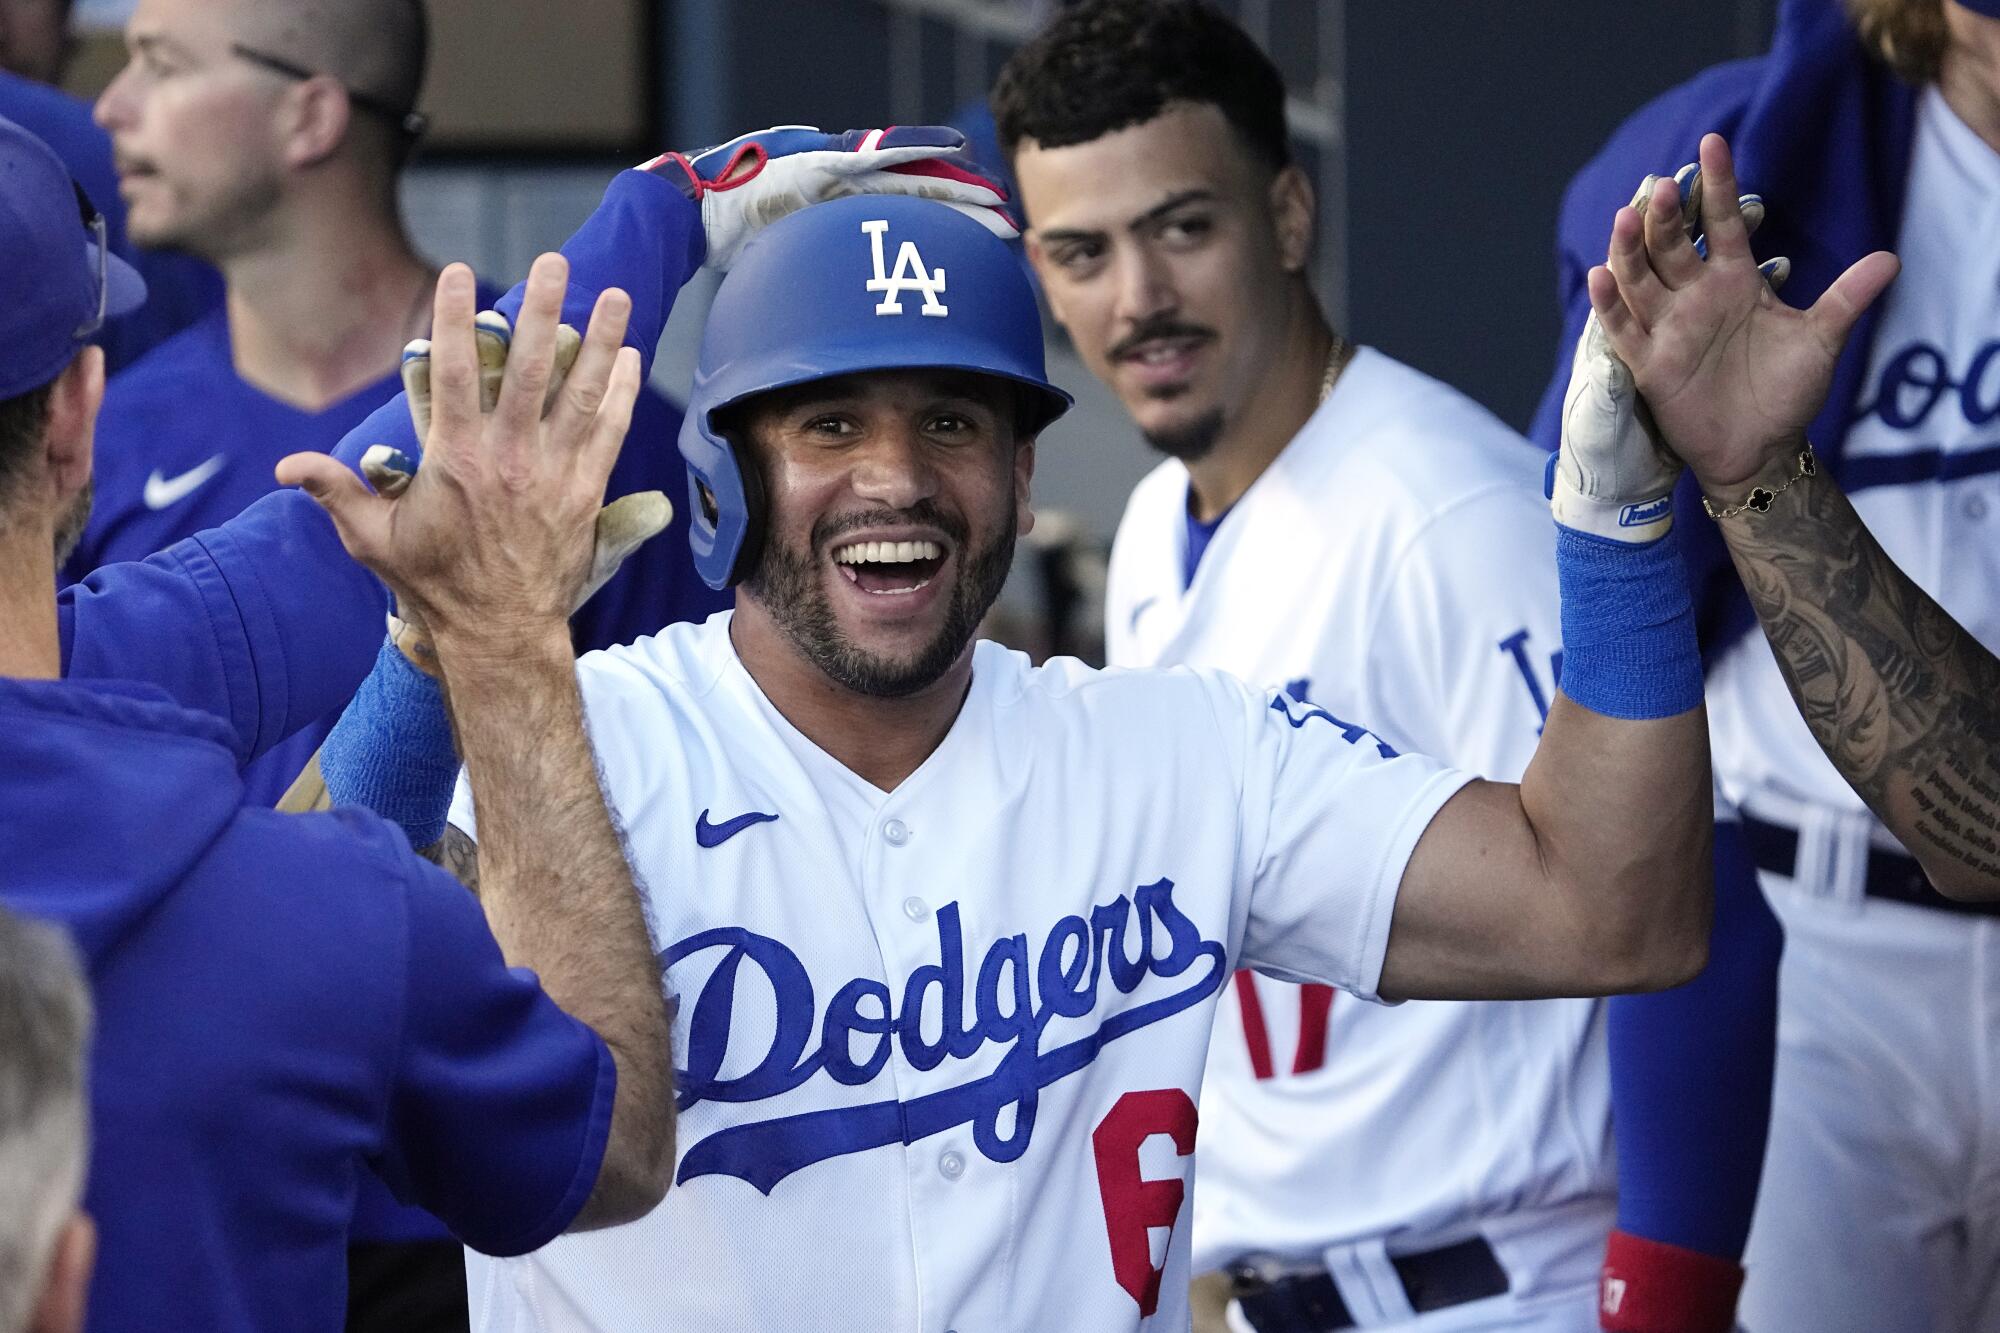 David Peralta celebrates in the dugout after hitting a two-run home run for the Dodgers in the seventh inning.